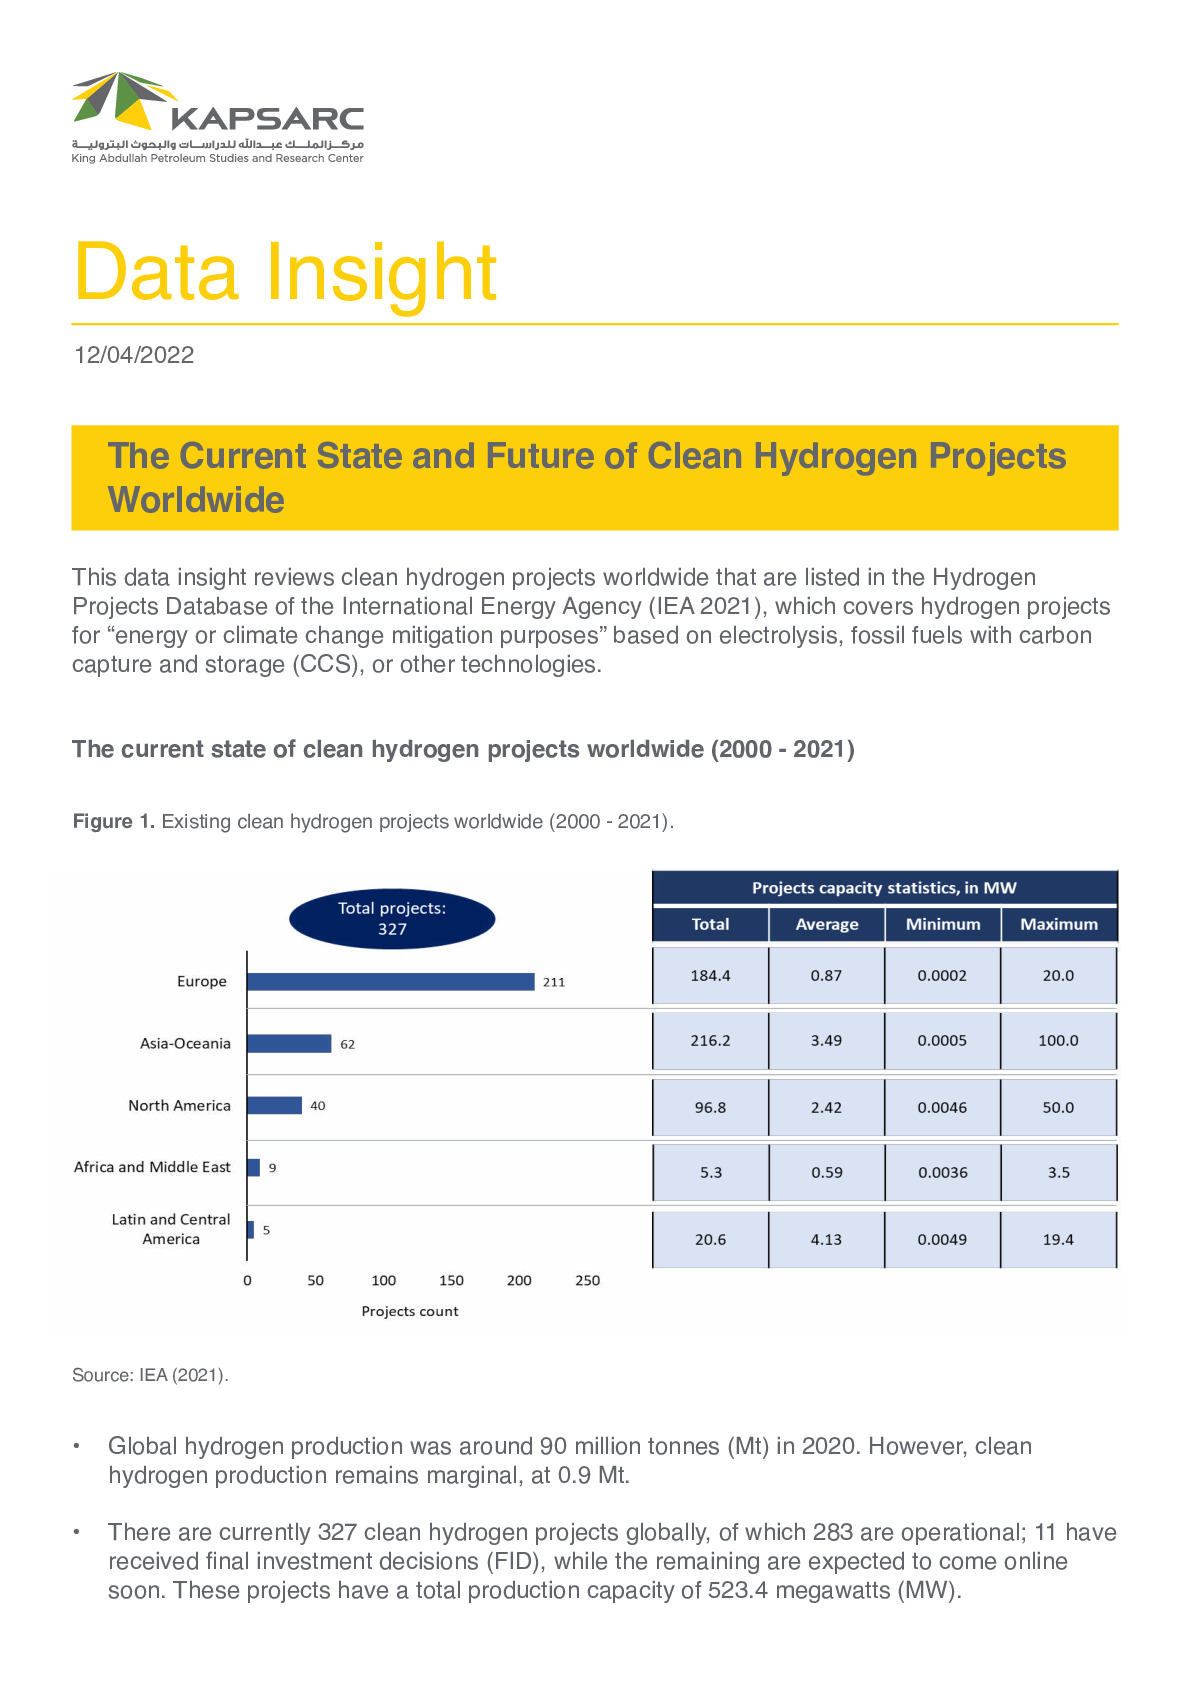 The Current State and Future of Clean Hydrogen Projects Worldwide